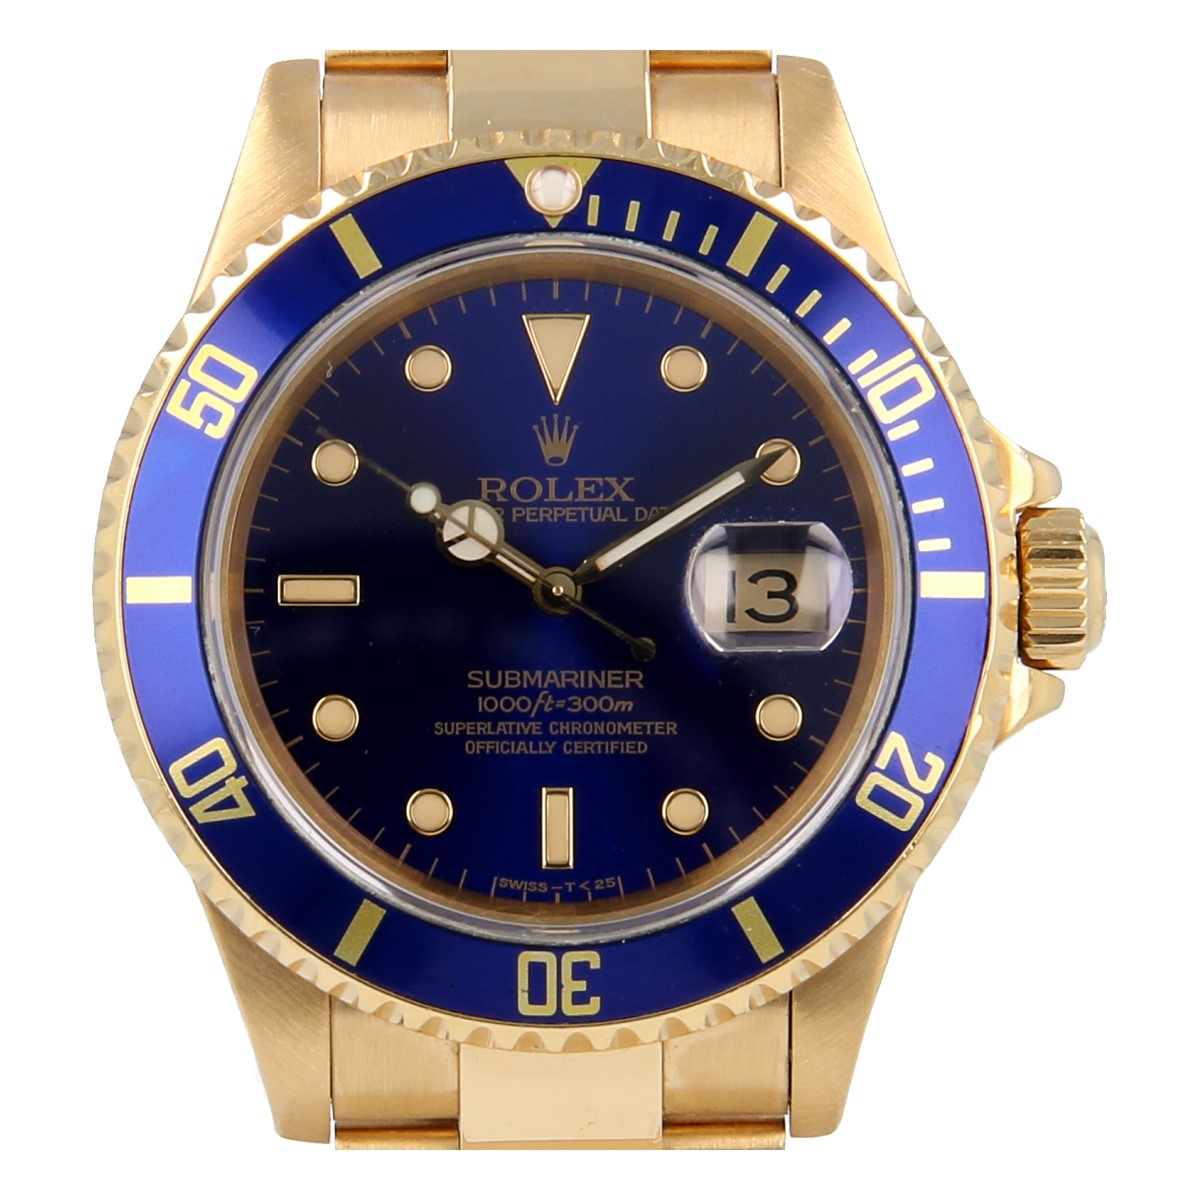 Rolex Submariner Date 16618 Purple Dial | Buy pre-owned Rolex watch